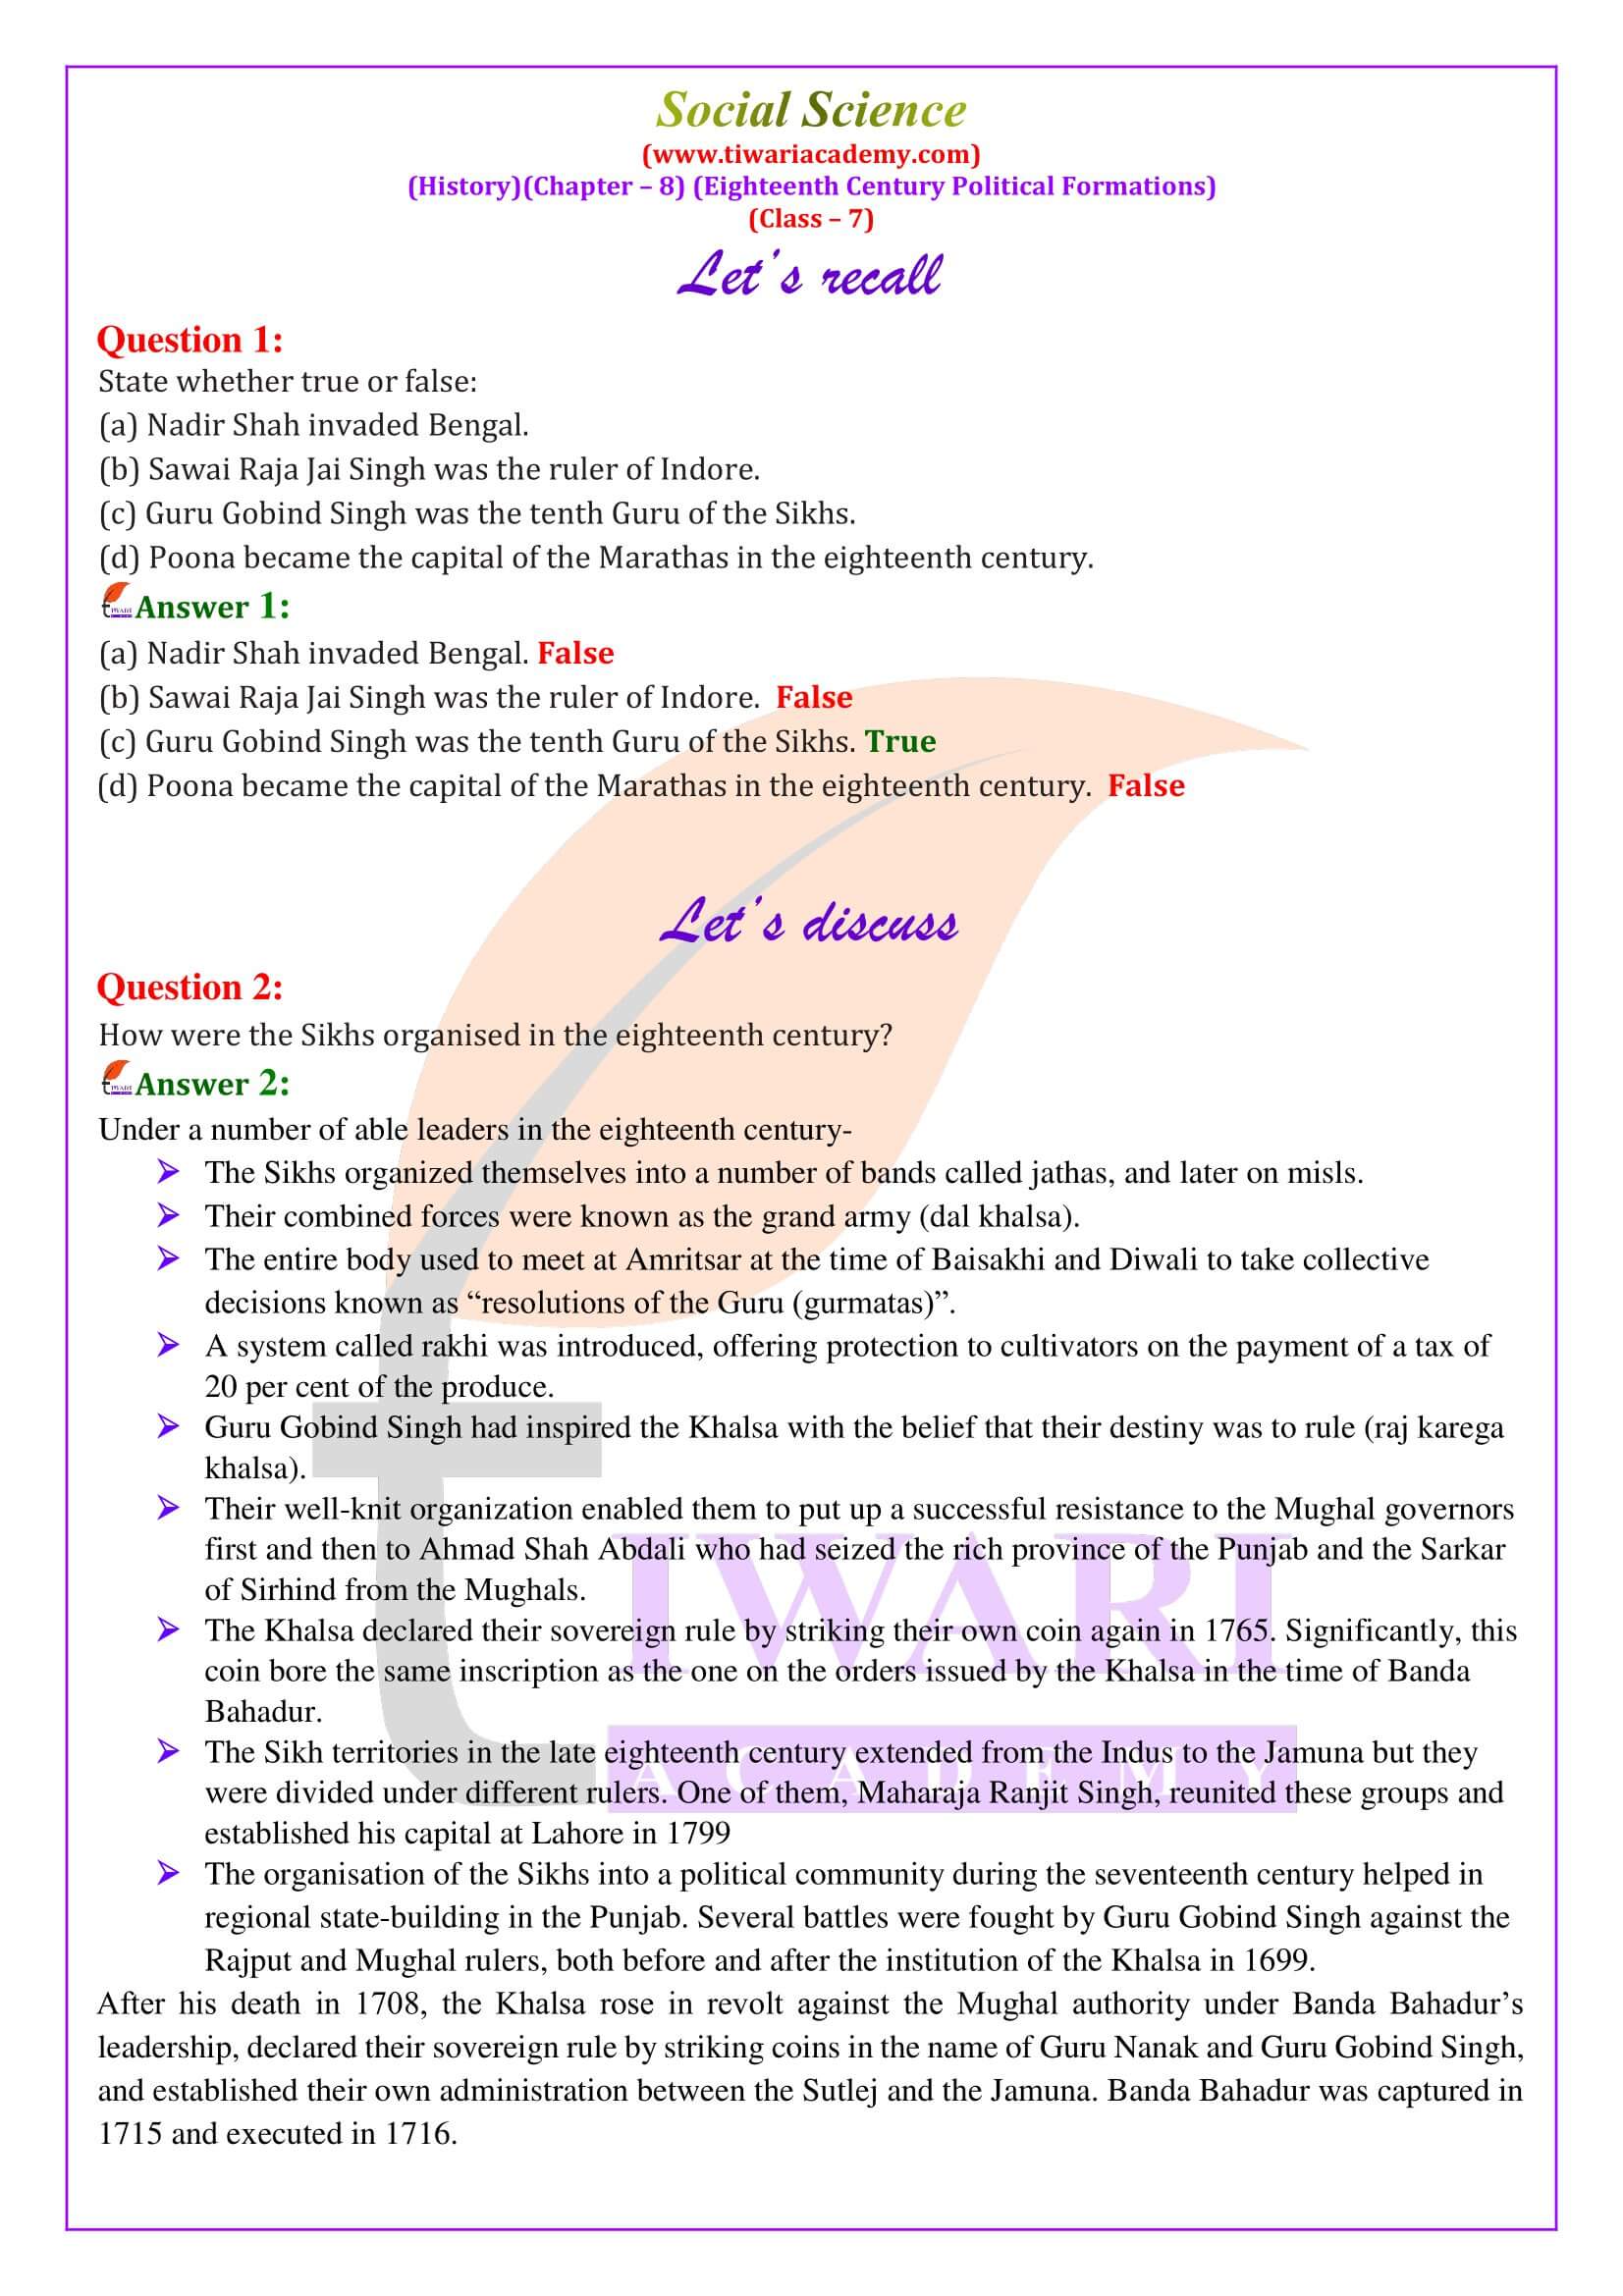 NCERT Solutions for Class 7 Social Science History Chapter 8